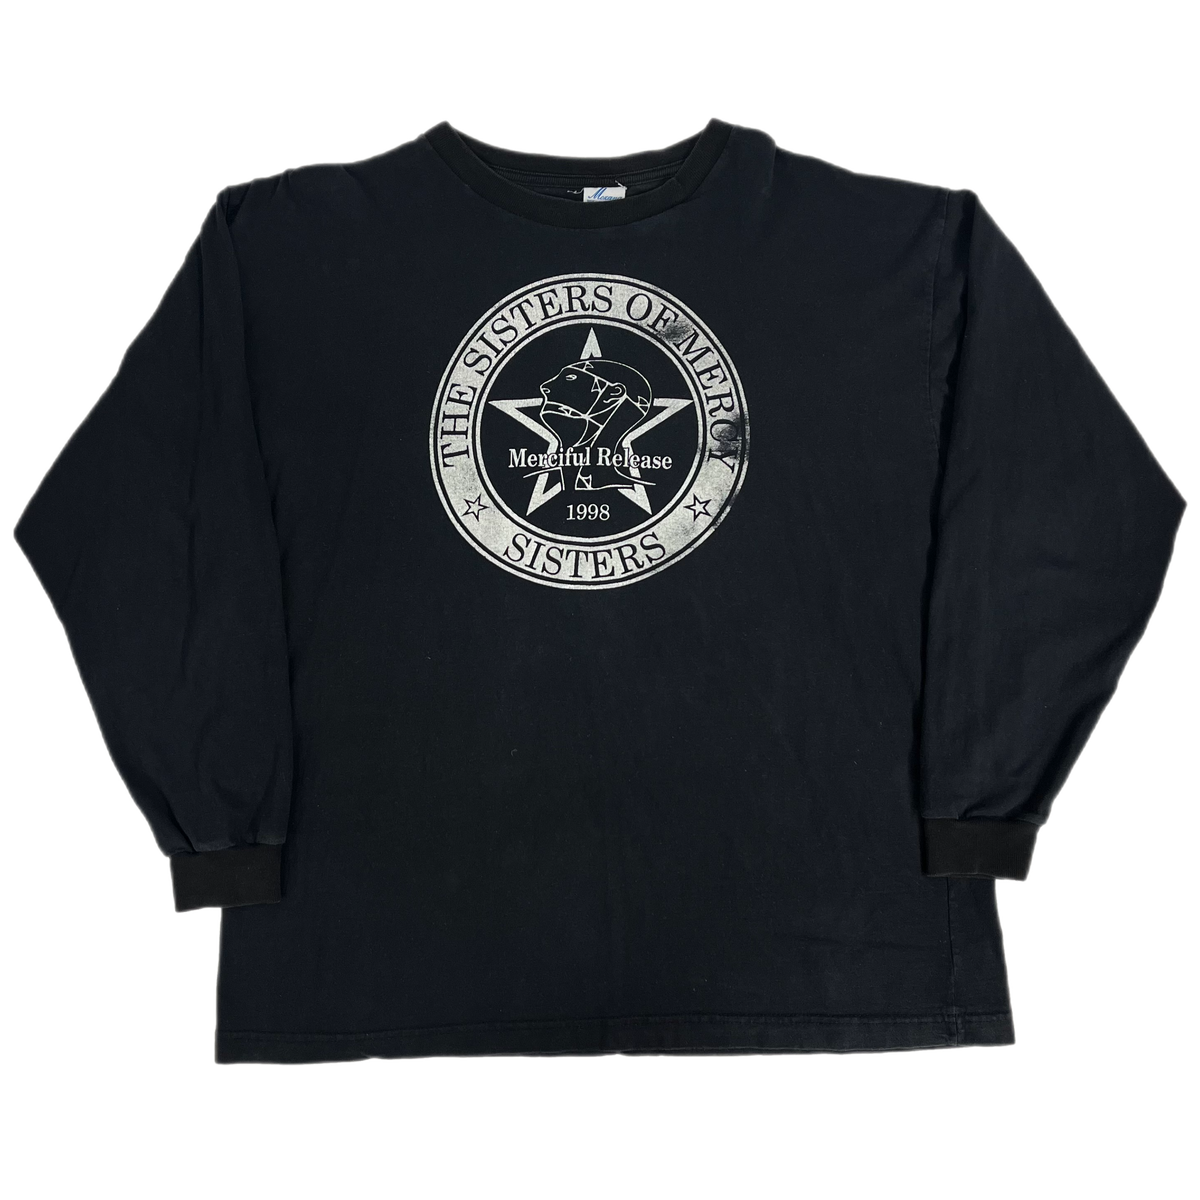 Vintage Sisters Of Mercy &quot;Merciful Release&quot; Long Sleeve Shirt